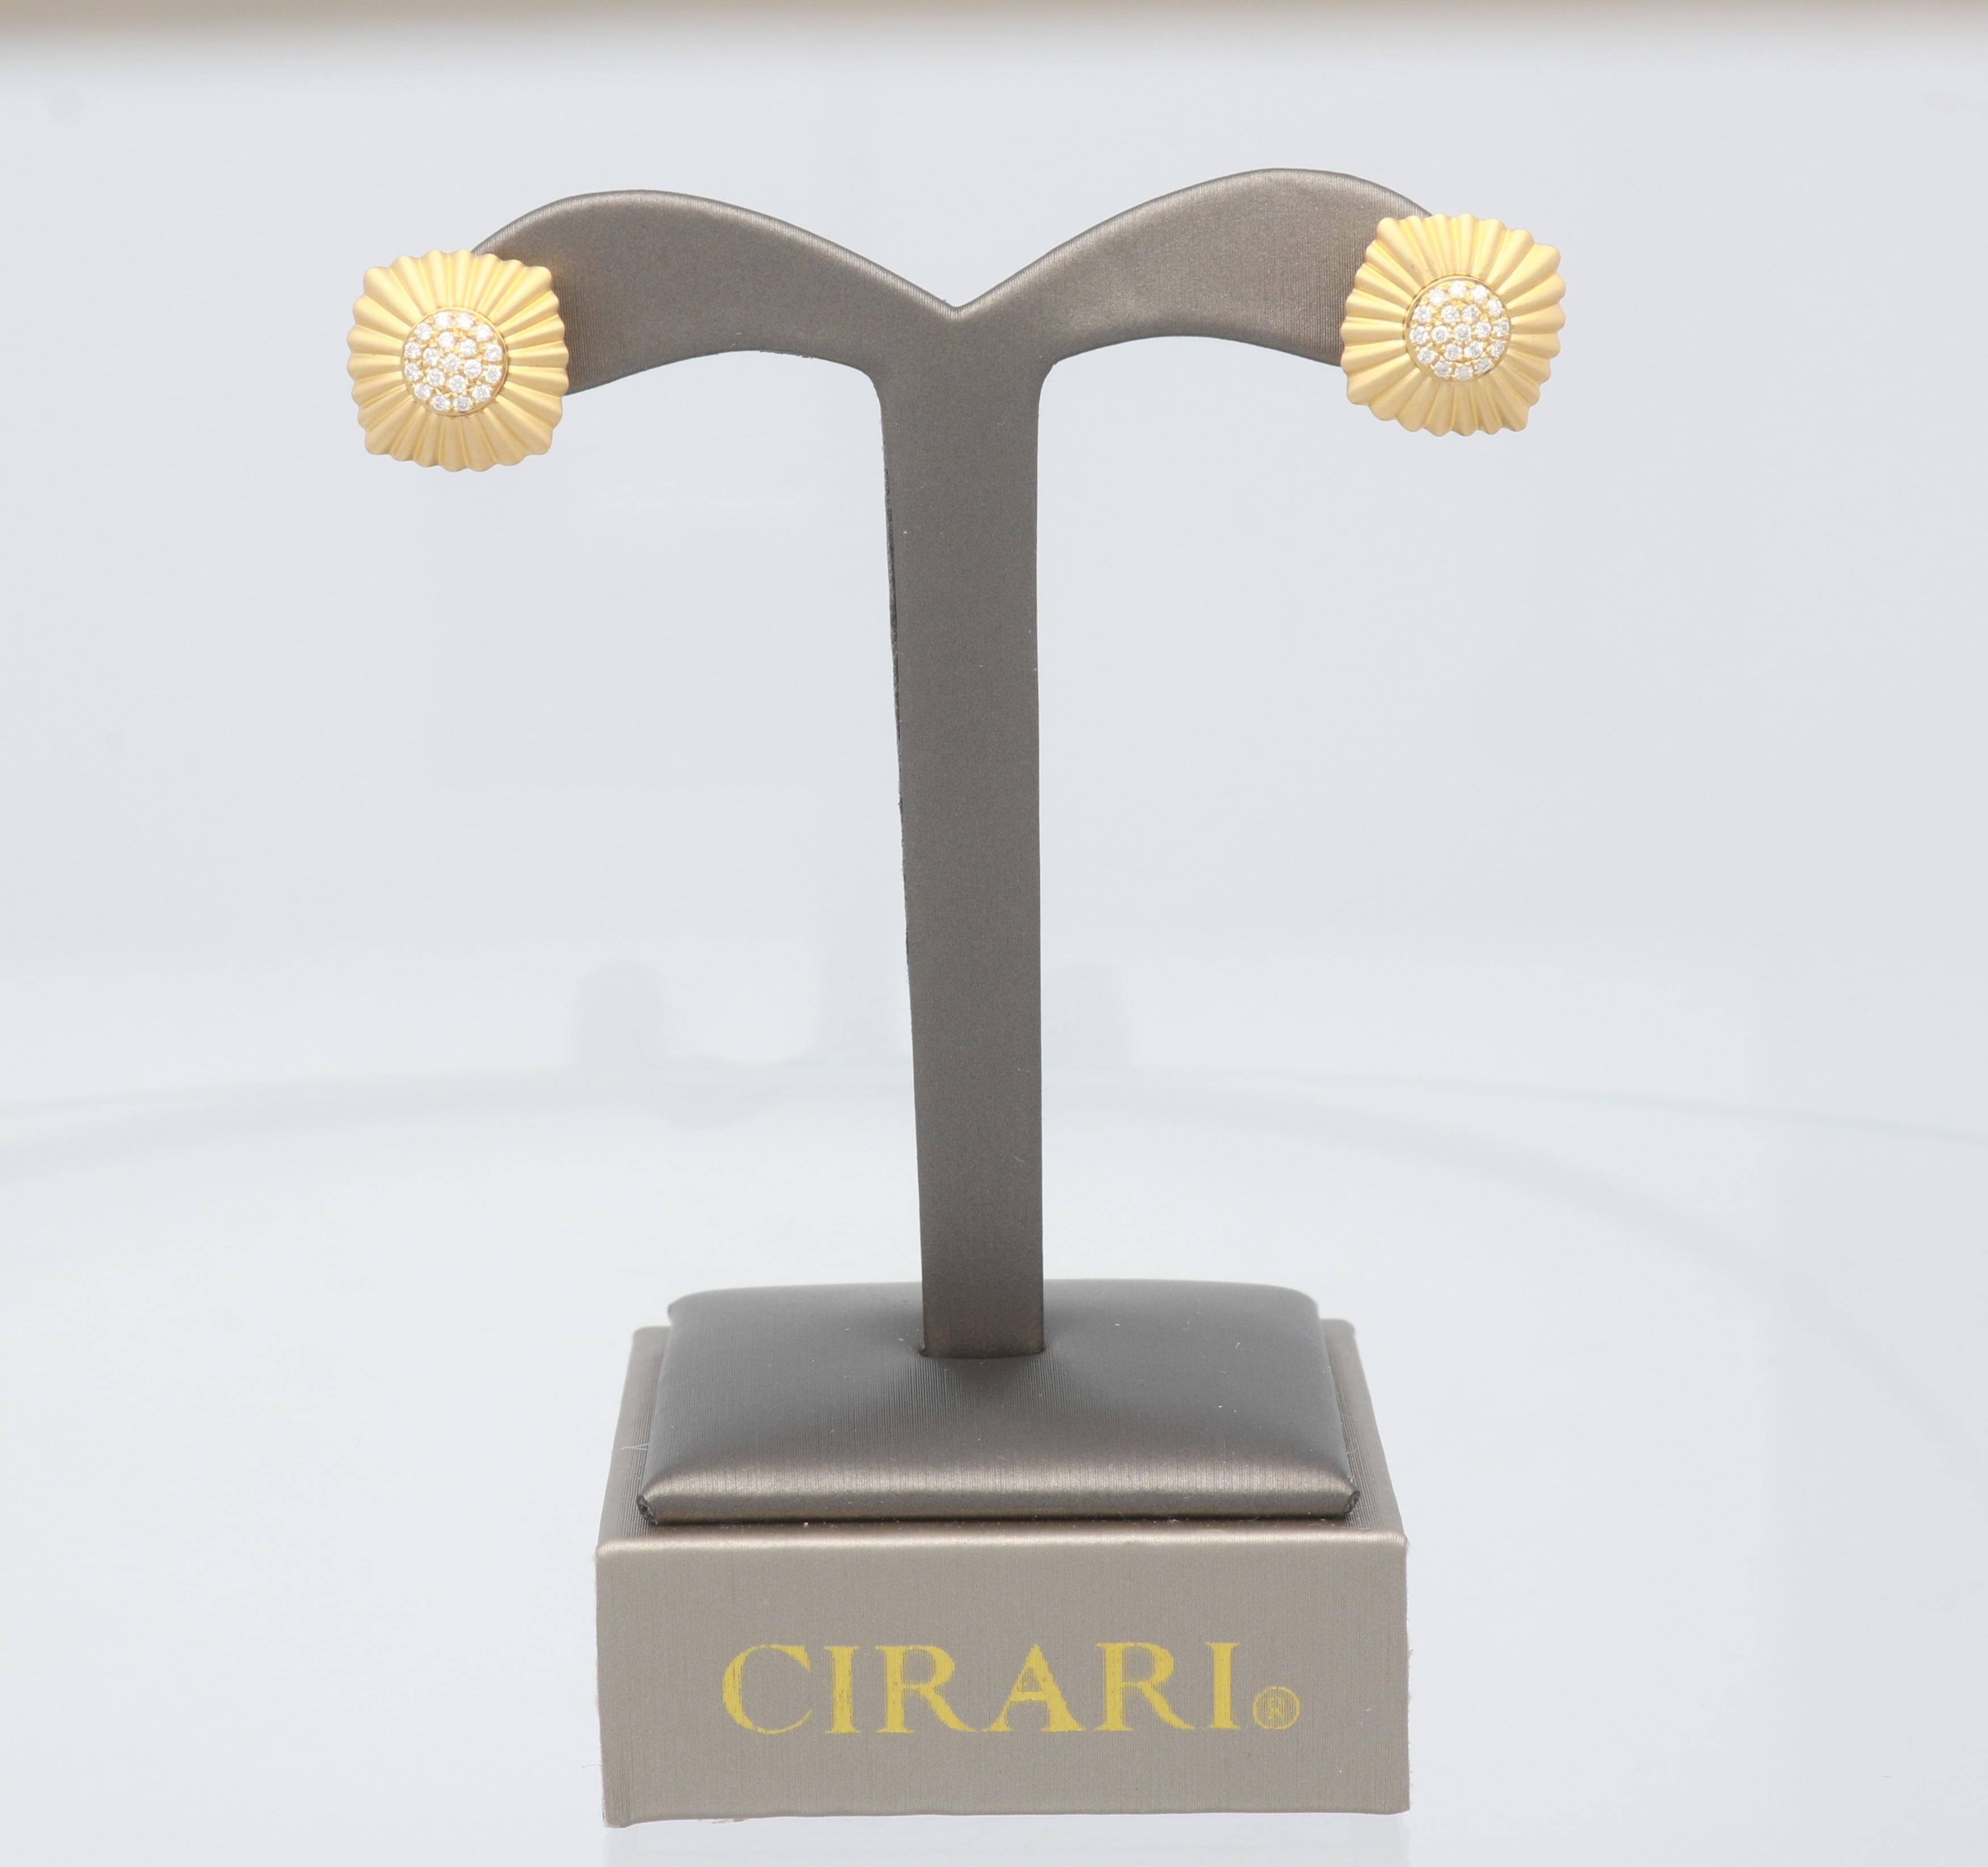 This one of a kind Earring is crafted in 18-karat Yellow Gold and features 38 Brilliant cut Round Diamonds 0.24 Carat. It is secured post back and is a perfect gift either for yourself or someone you love.